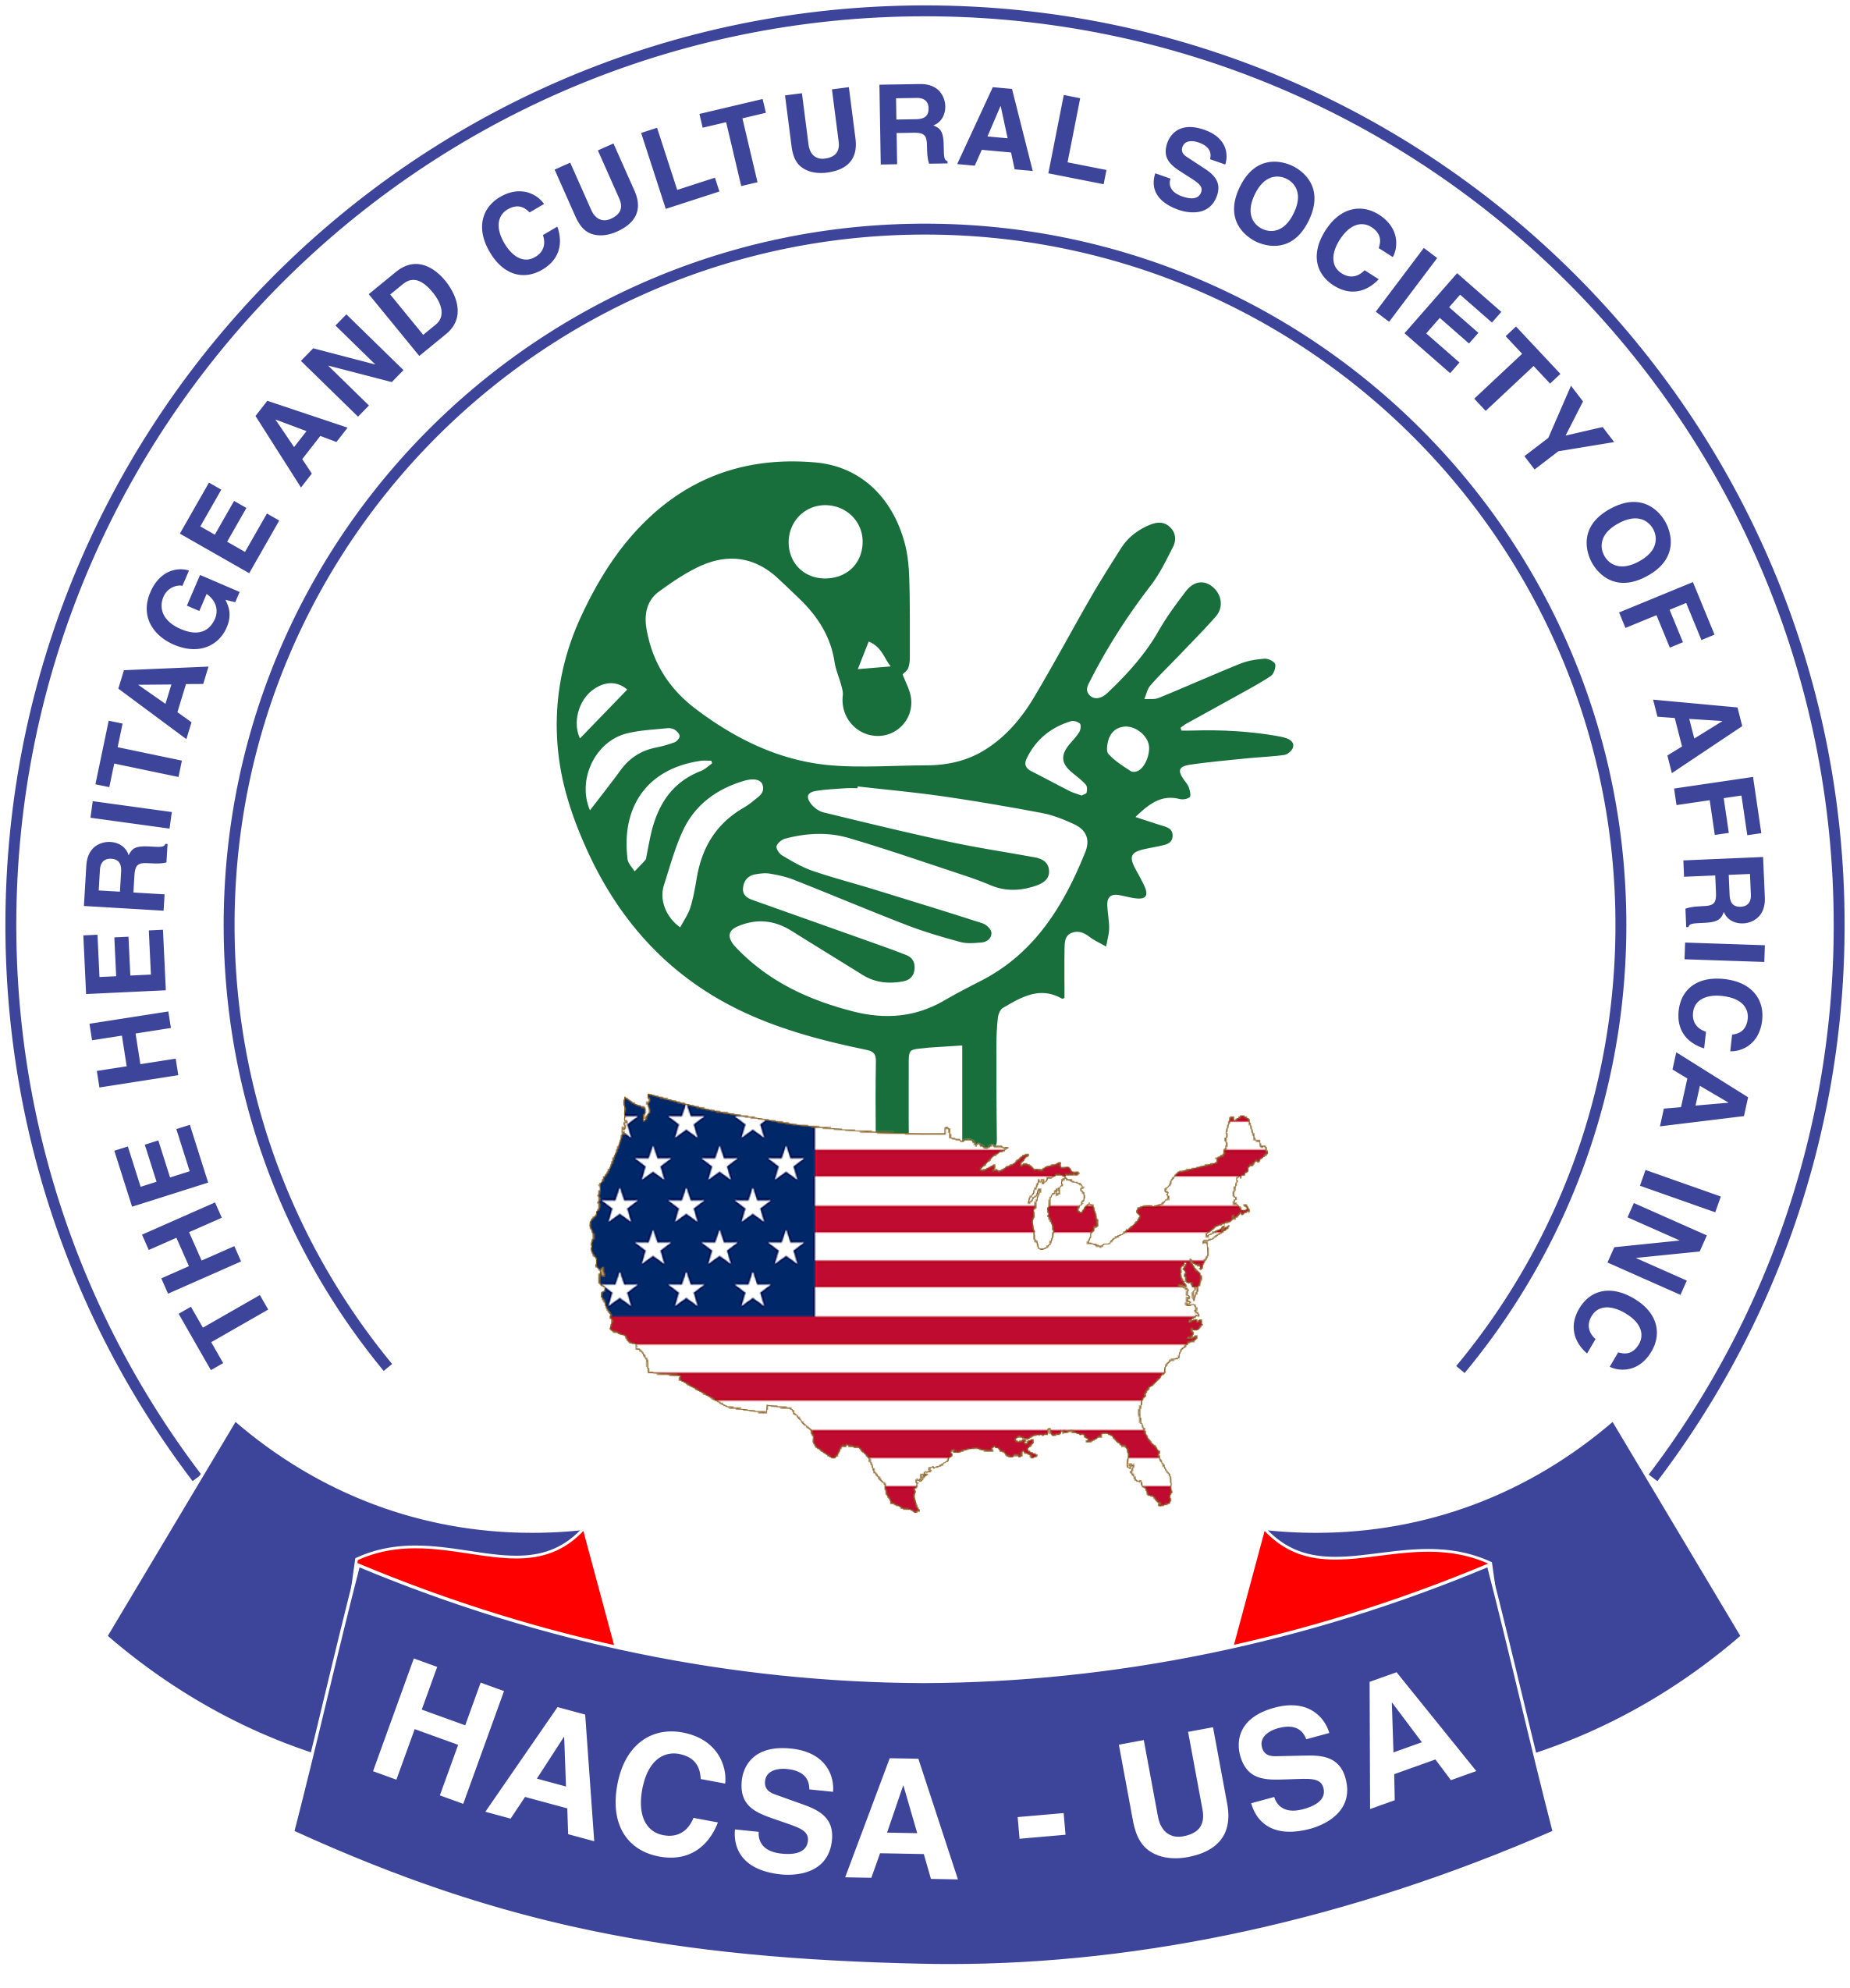 The Heritage and Cultural Society of Africa logo